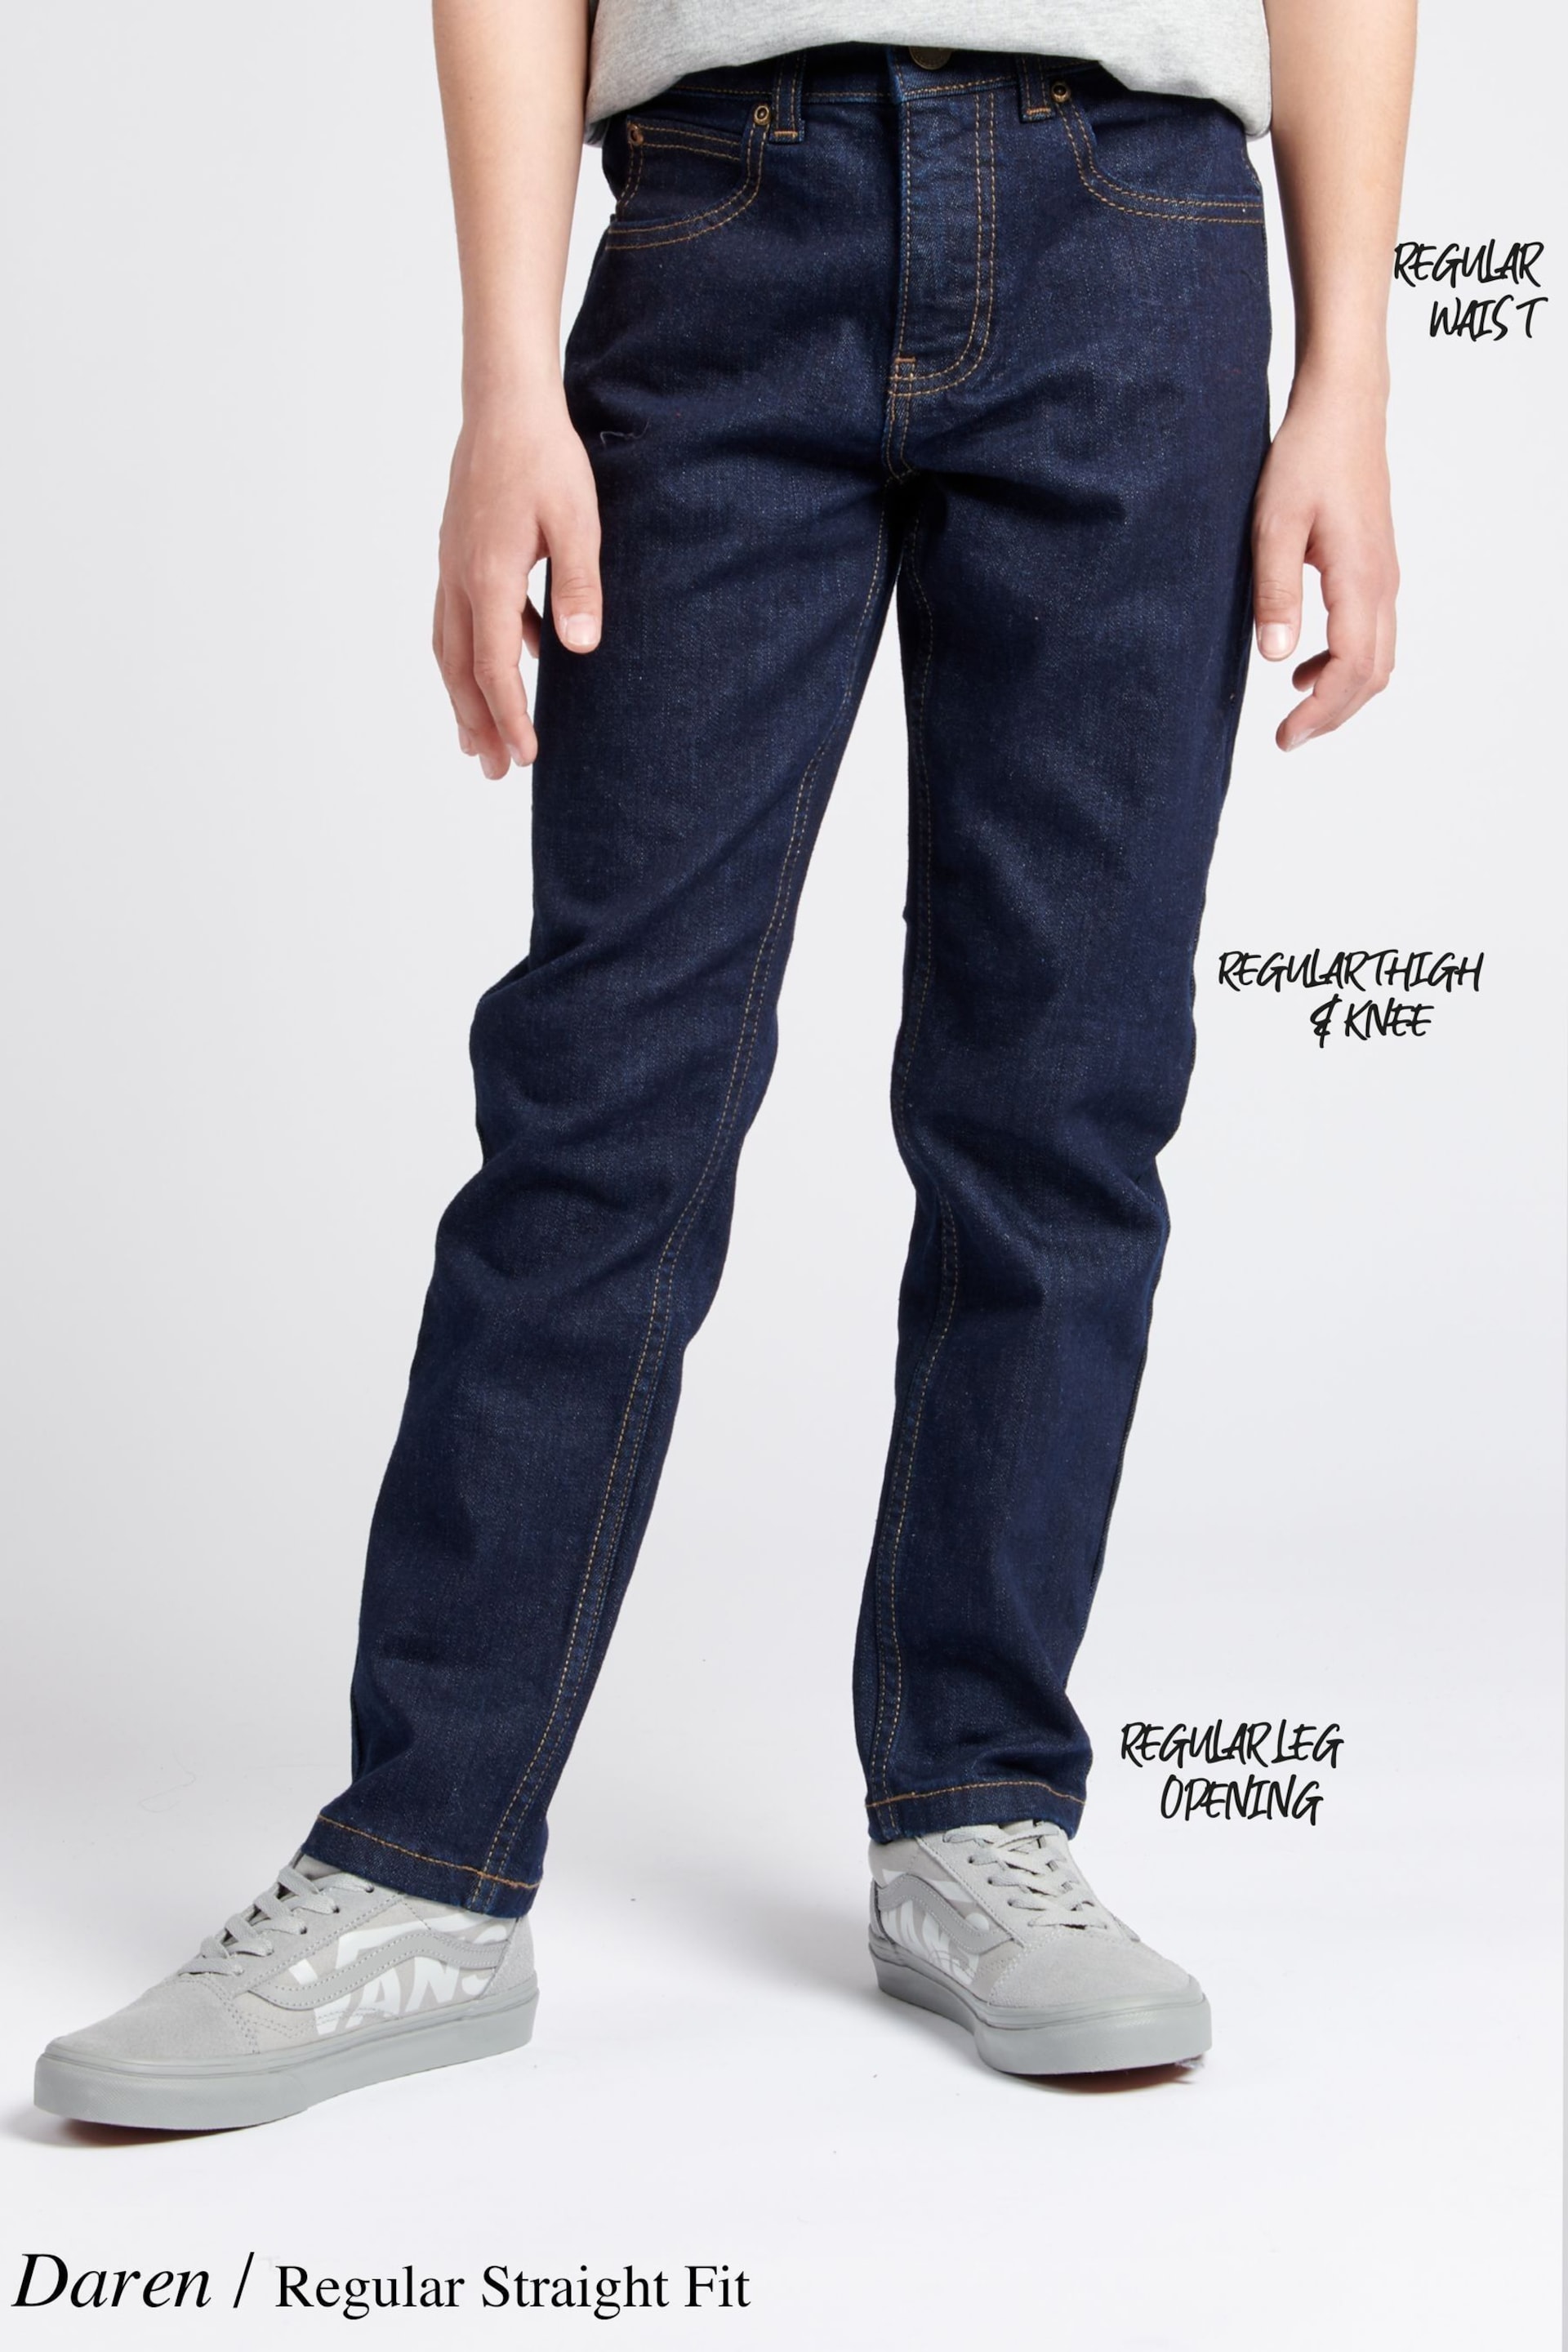 Lee Boys Daren Straight Fit Jeans - Image 5 of 7